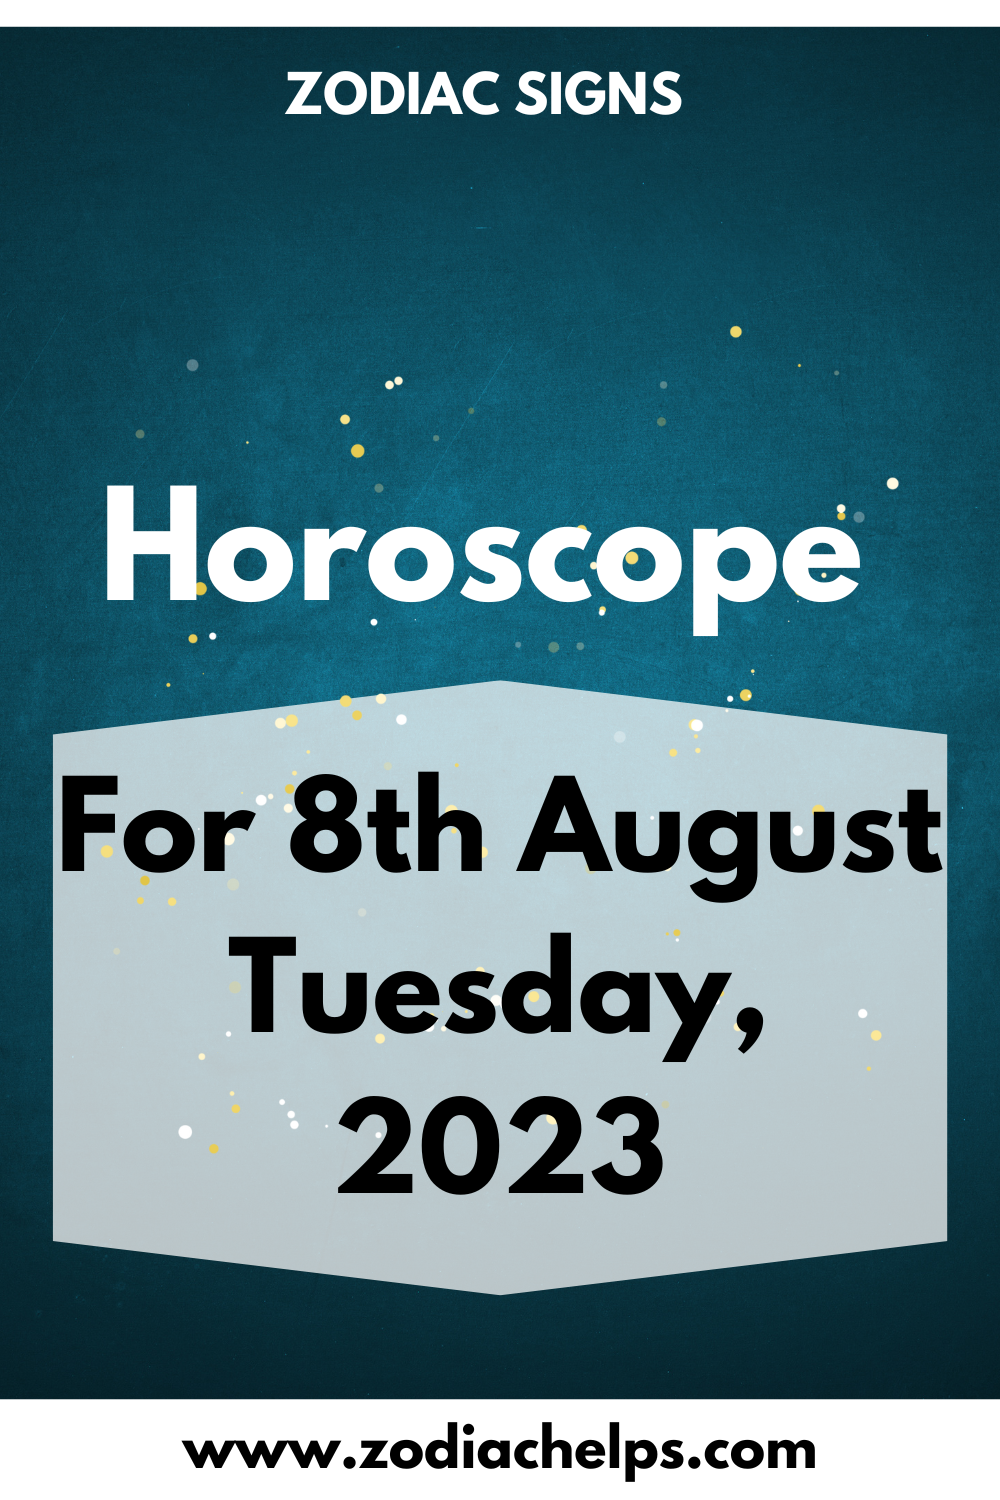 Horoscope for 8th August Tuesday, 2023